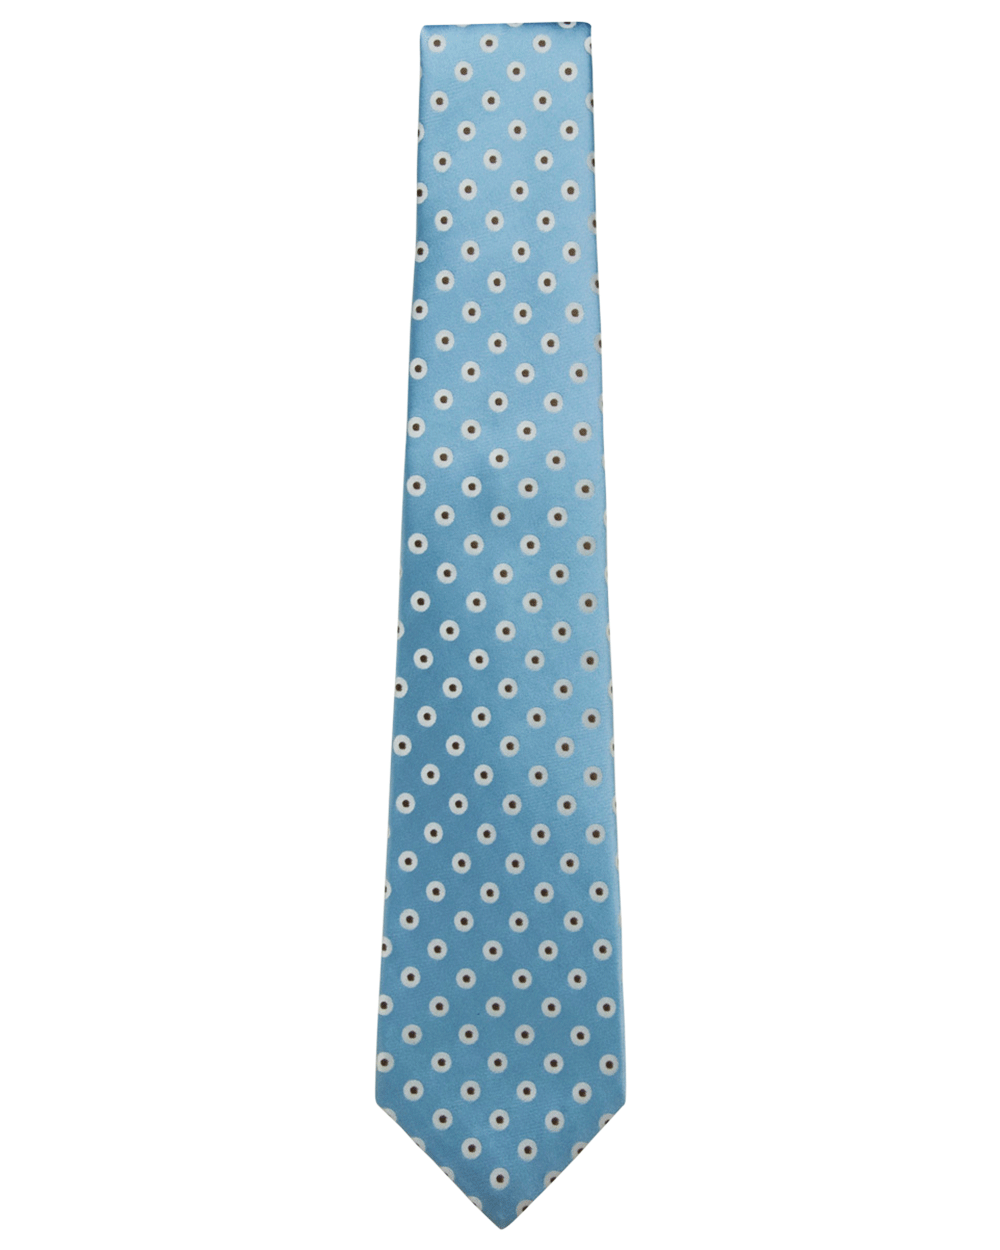 Blue and Silver Dotted Tie